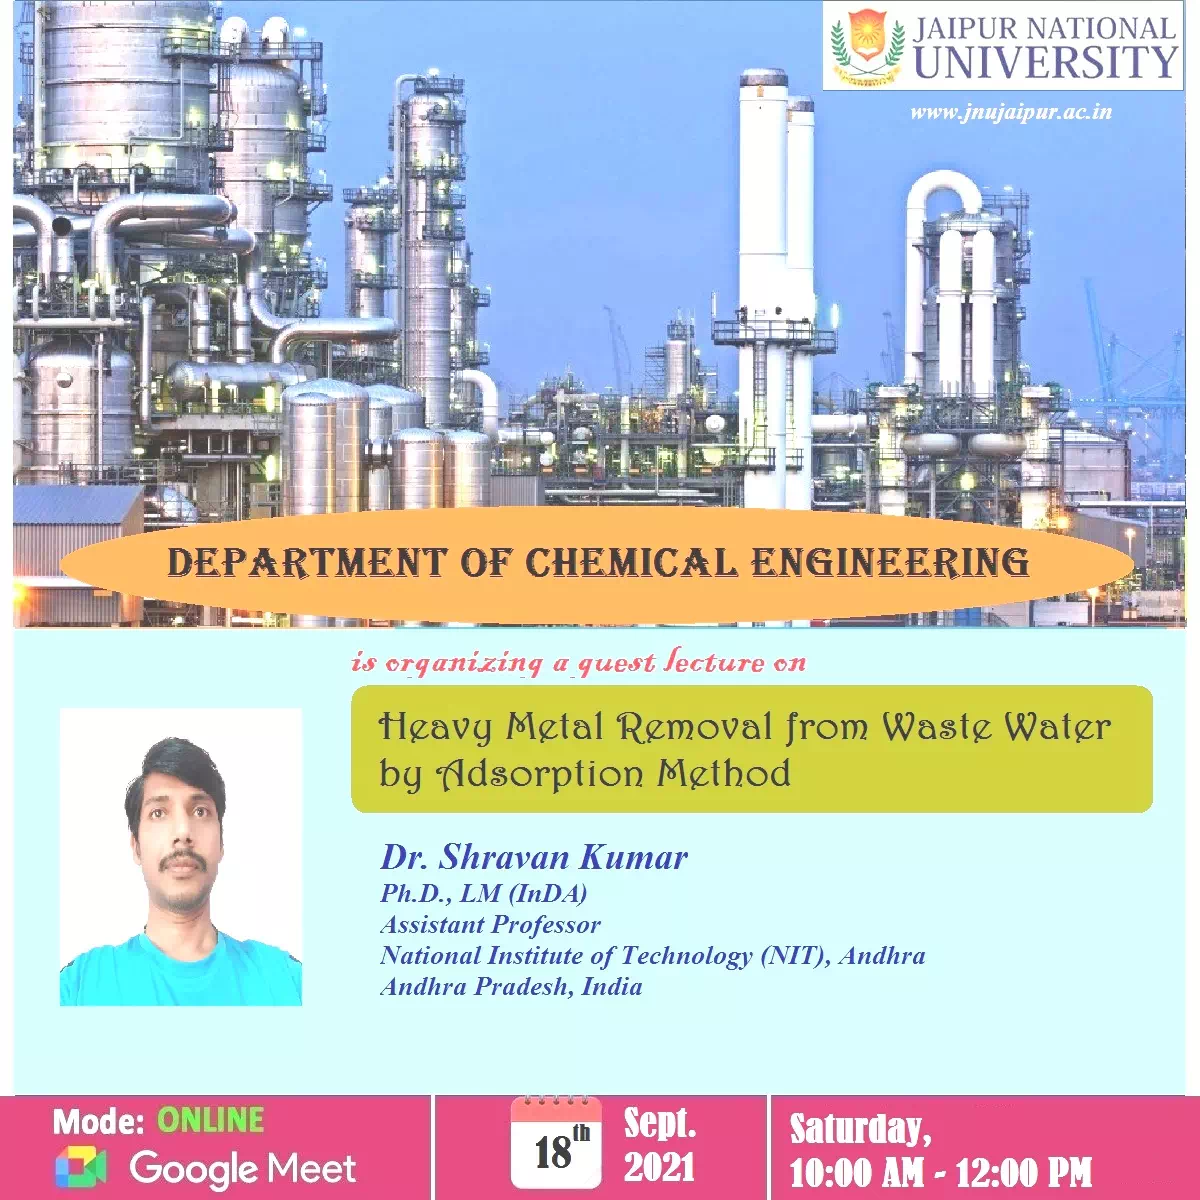 Guest Lecture on Heavy Metal Removal from Wastewater by Adsorption Method